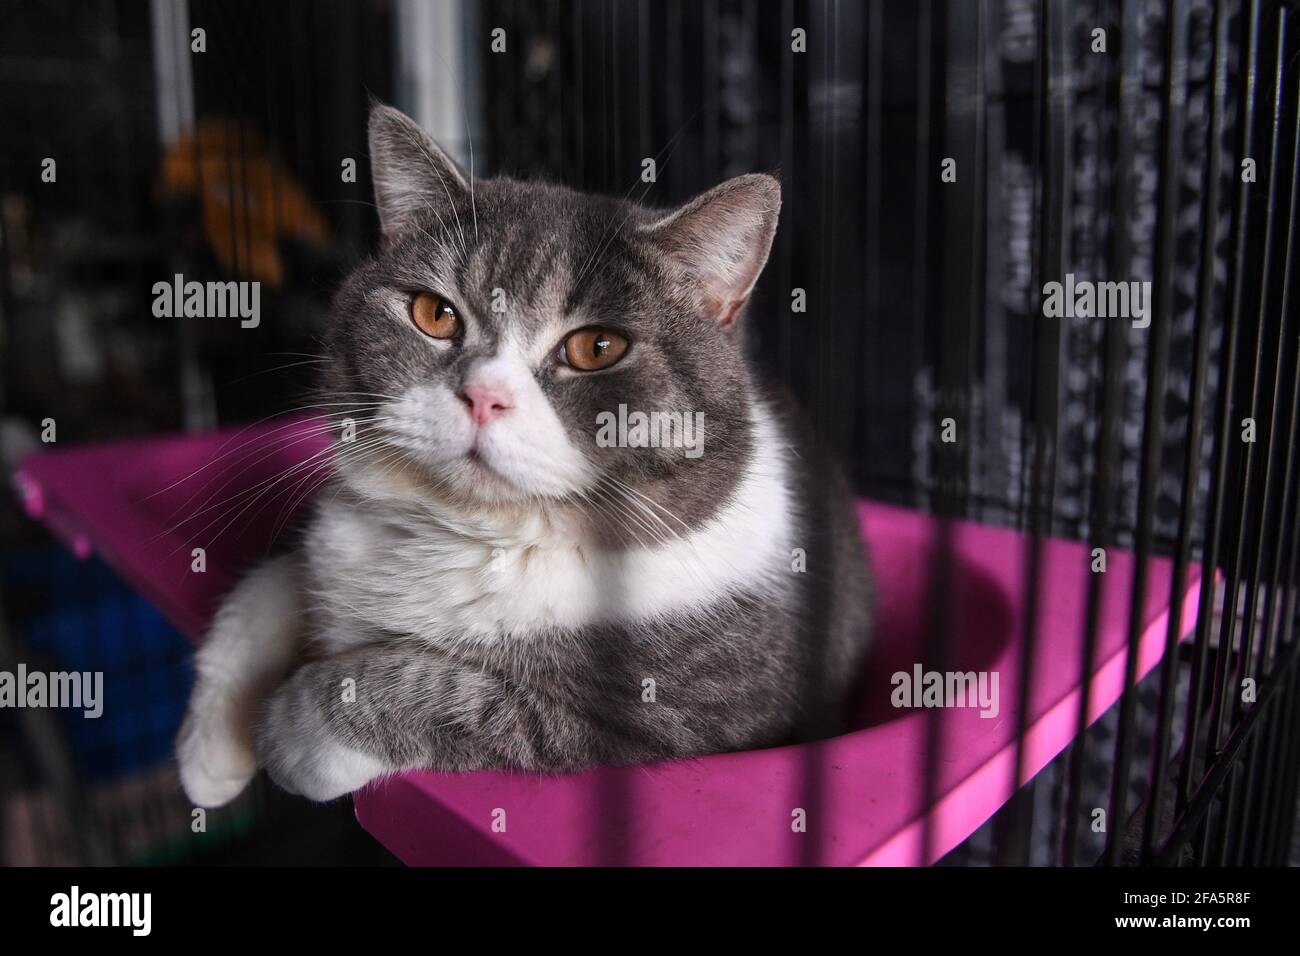 One of the pedigree cats confiscated as live assets in a drug bust case is pictured inside its cage at an auction at an animal shelter in Rayong province, Thailand, April 23, 2021. REUTERS/Chalinee Thirasupa Stock Photo